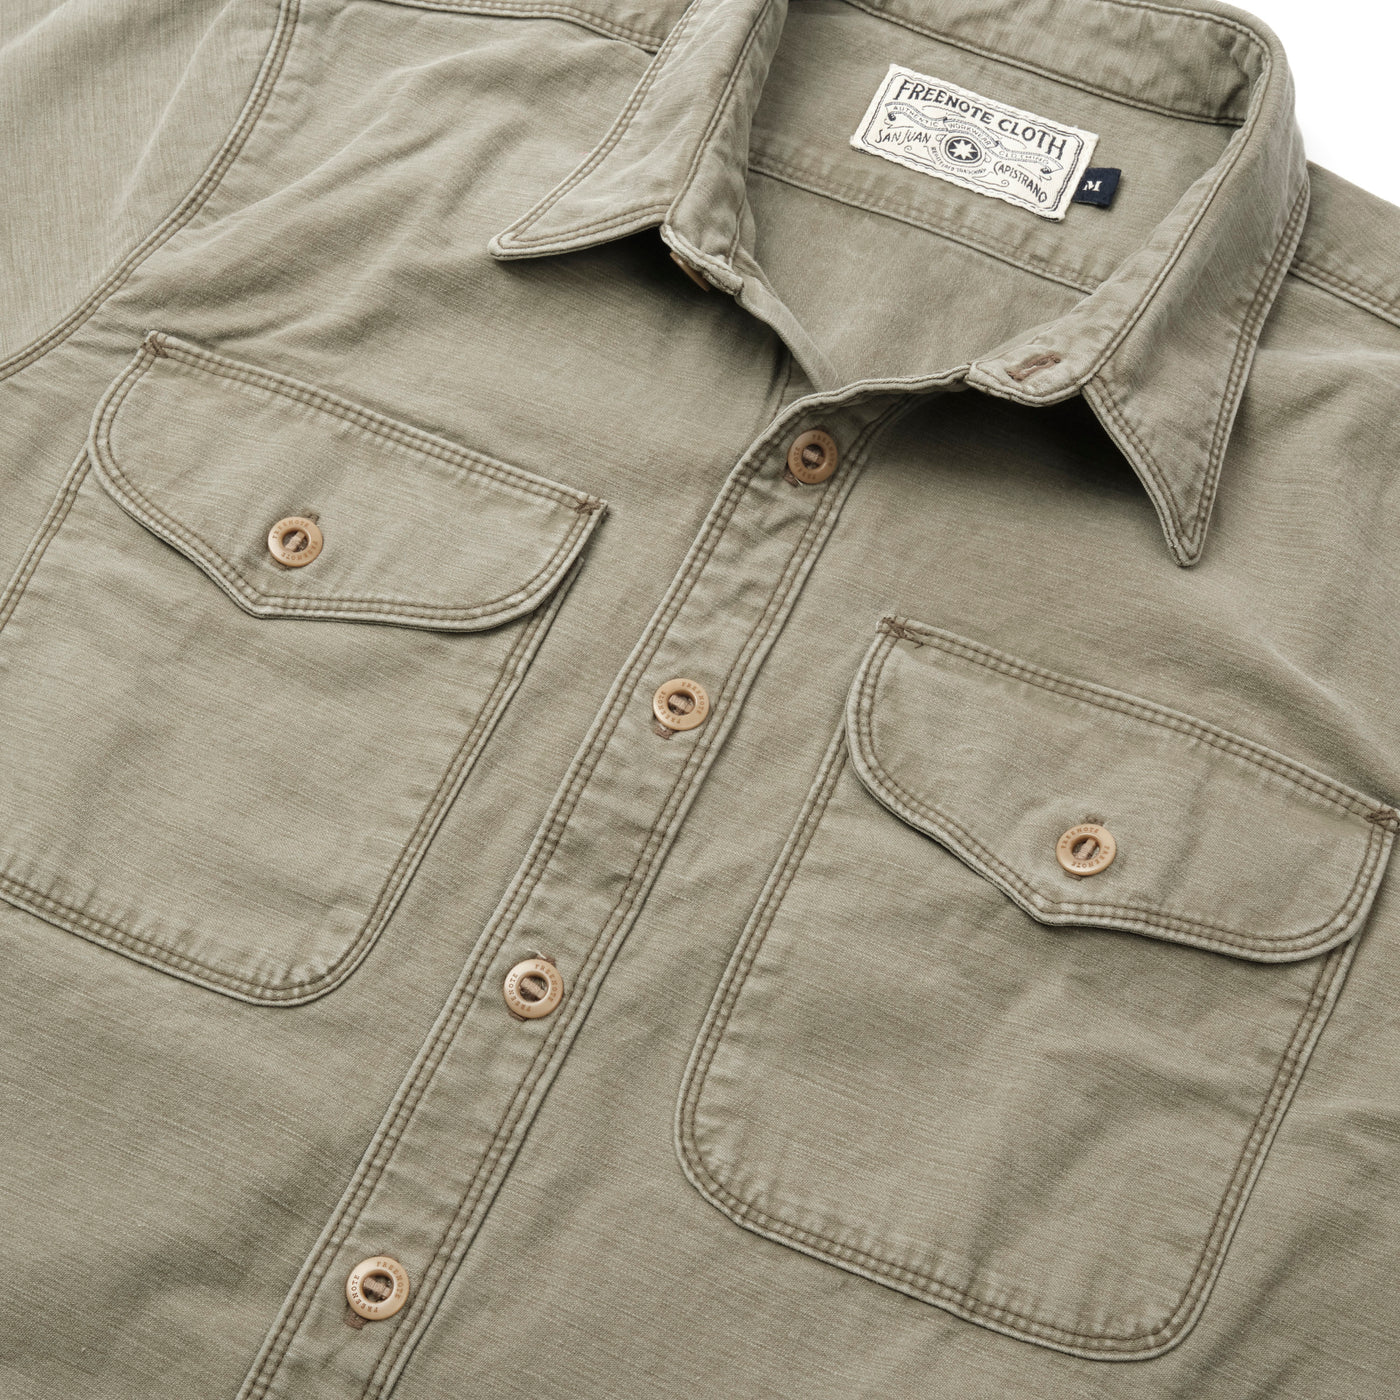 Freenote Cloth Utility Light in Olive